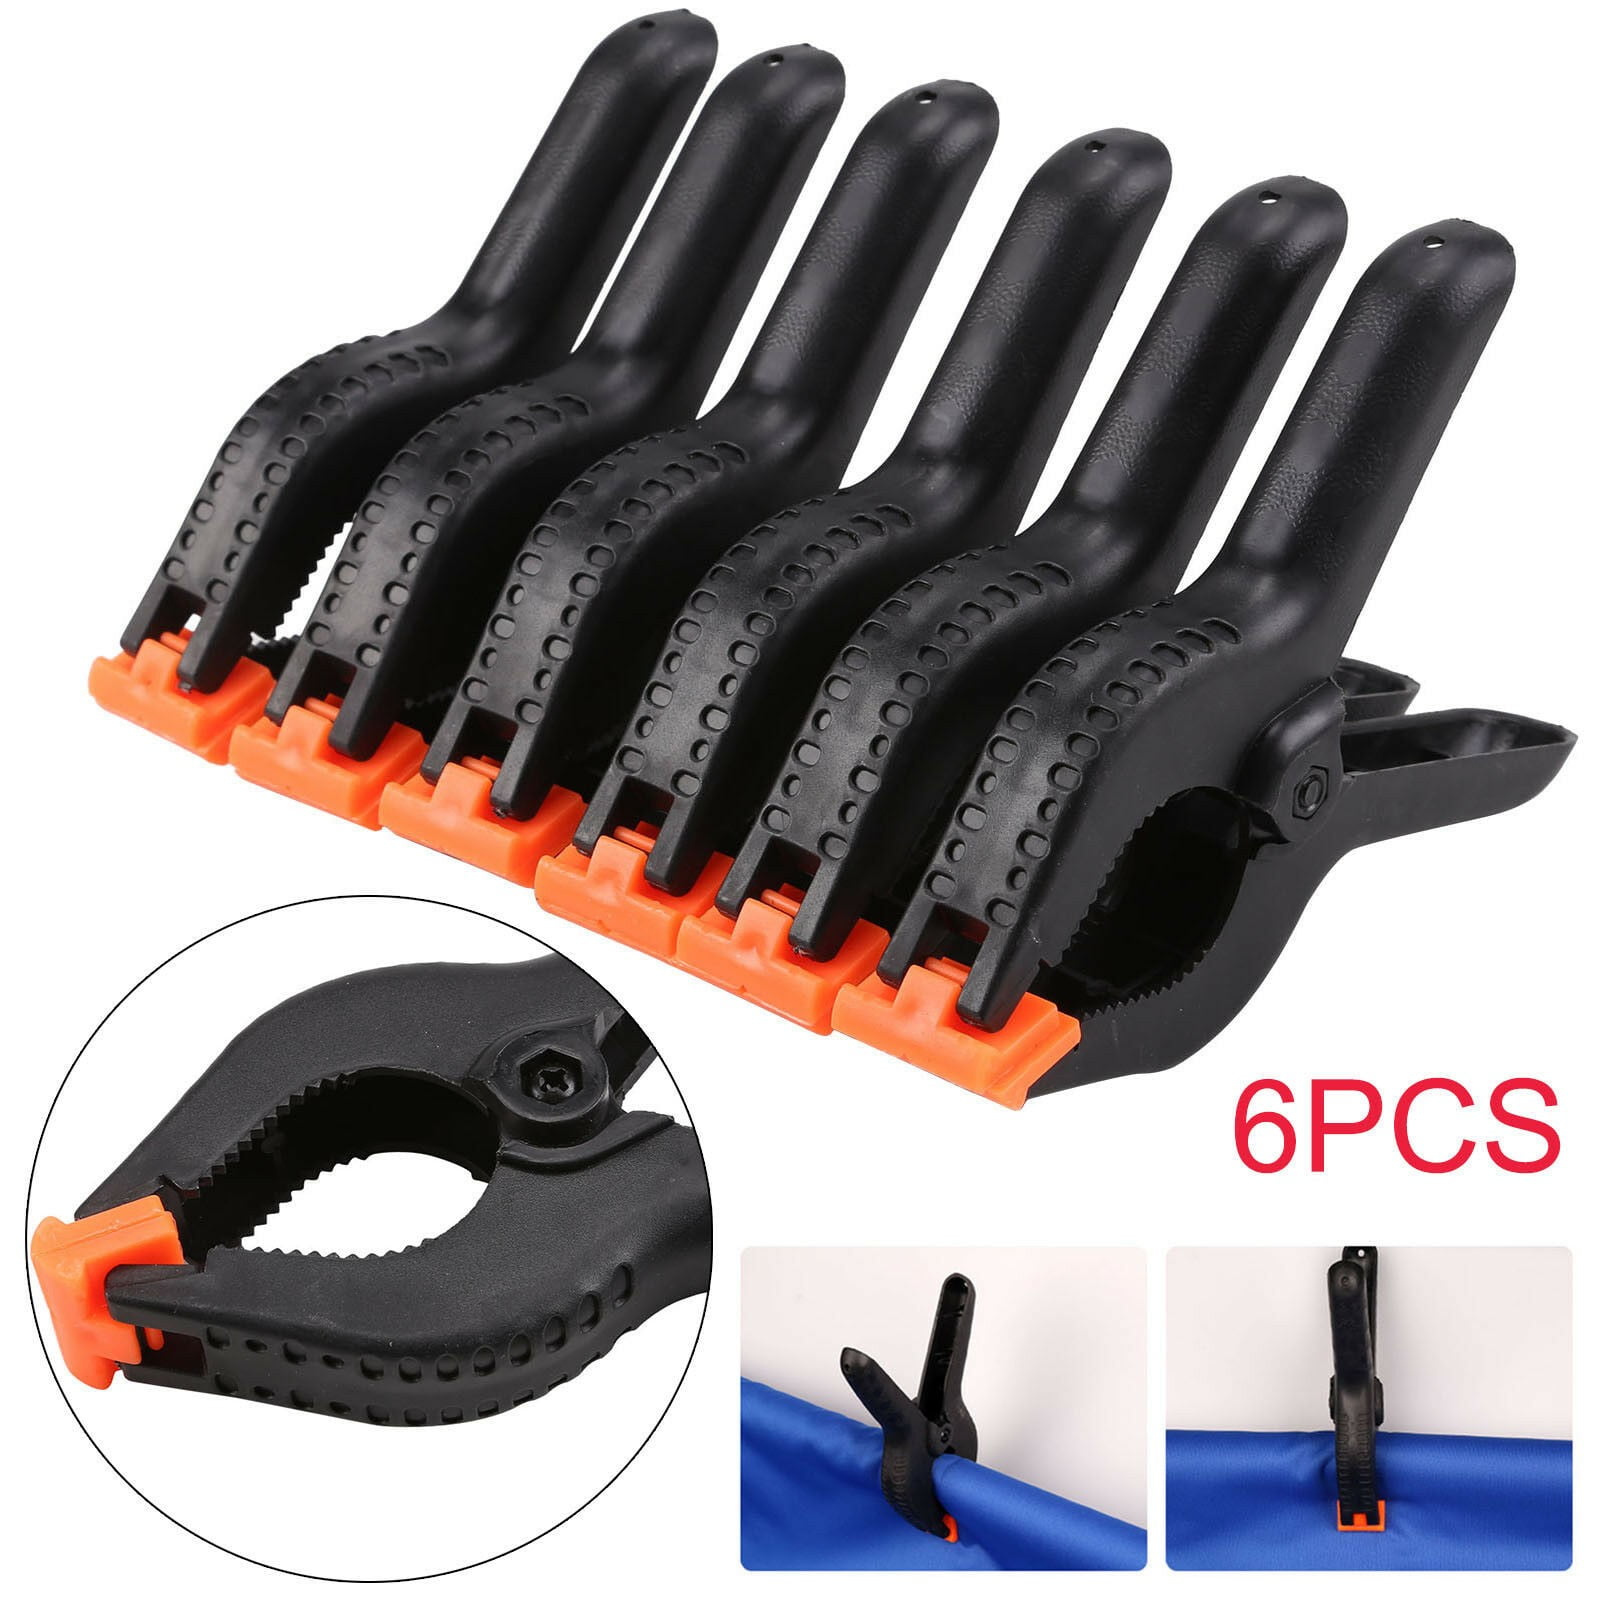 6 x 6" PLASTIC SPRING CLAMPS TARPAULIN CLIPS MARKET STALL 